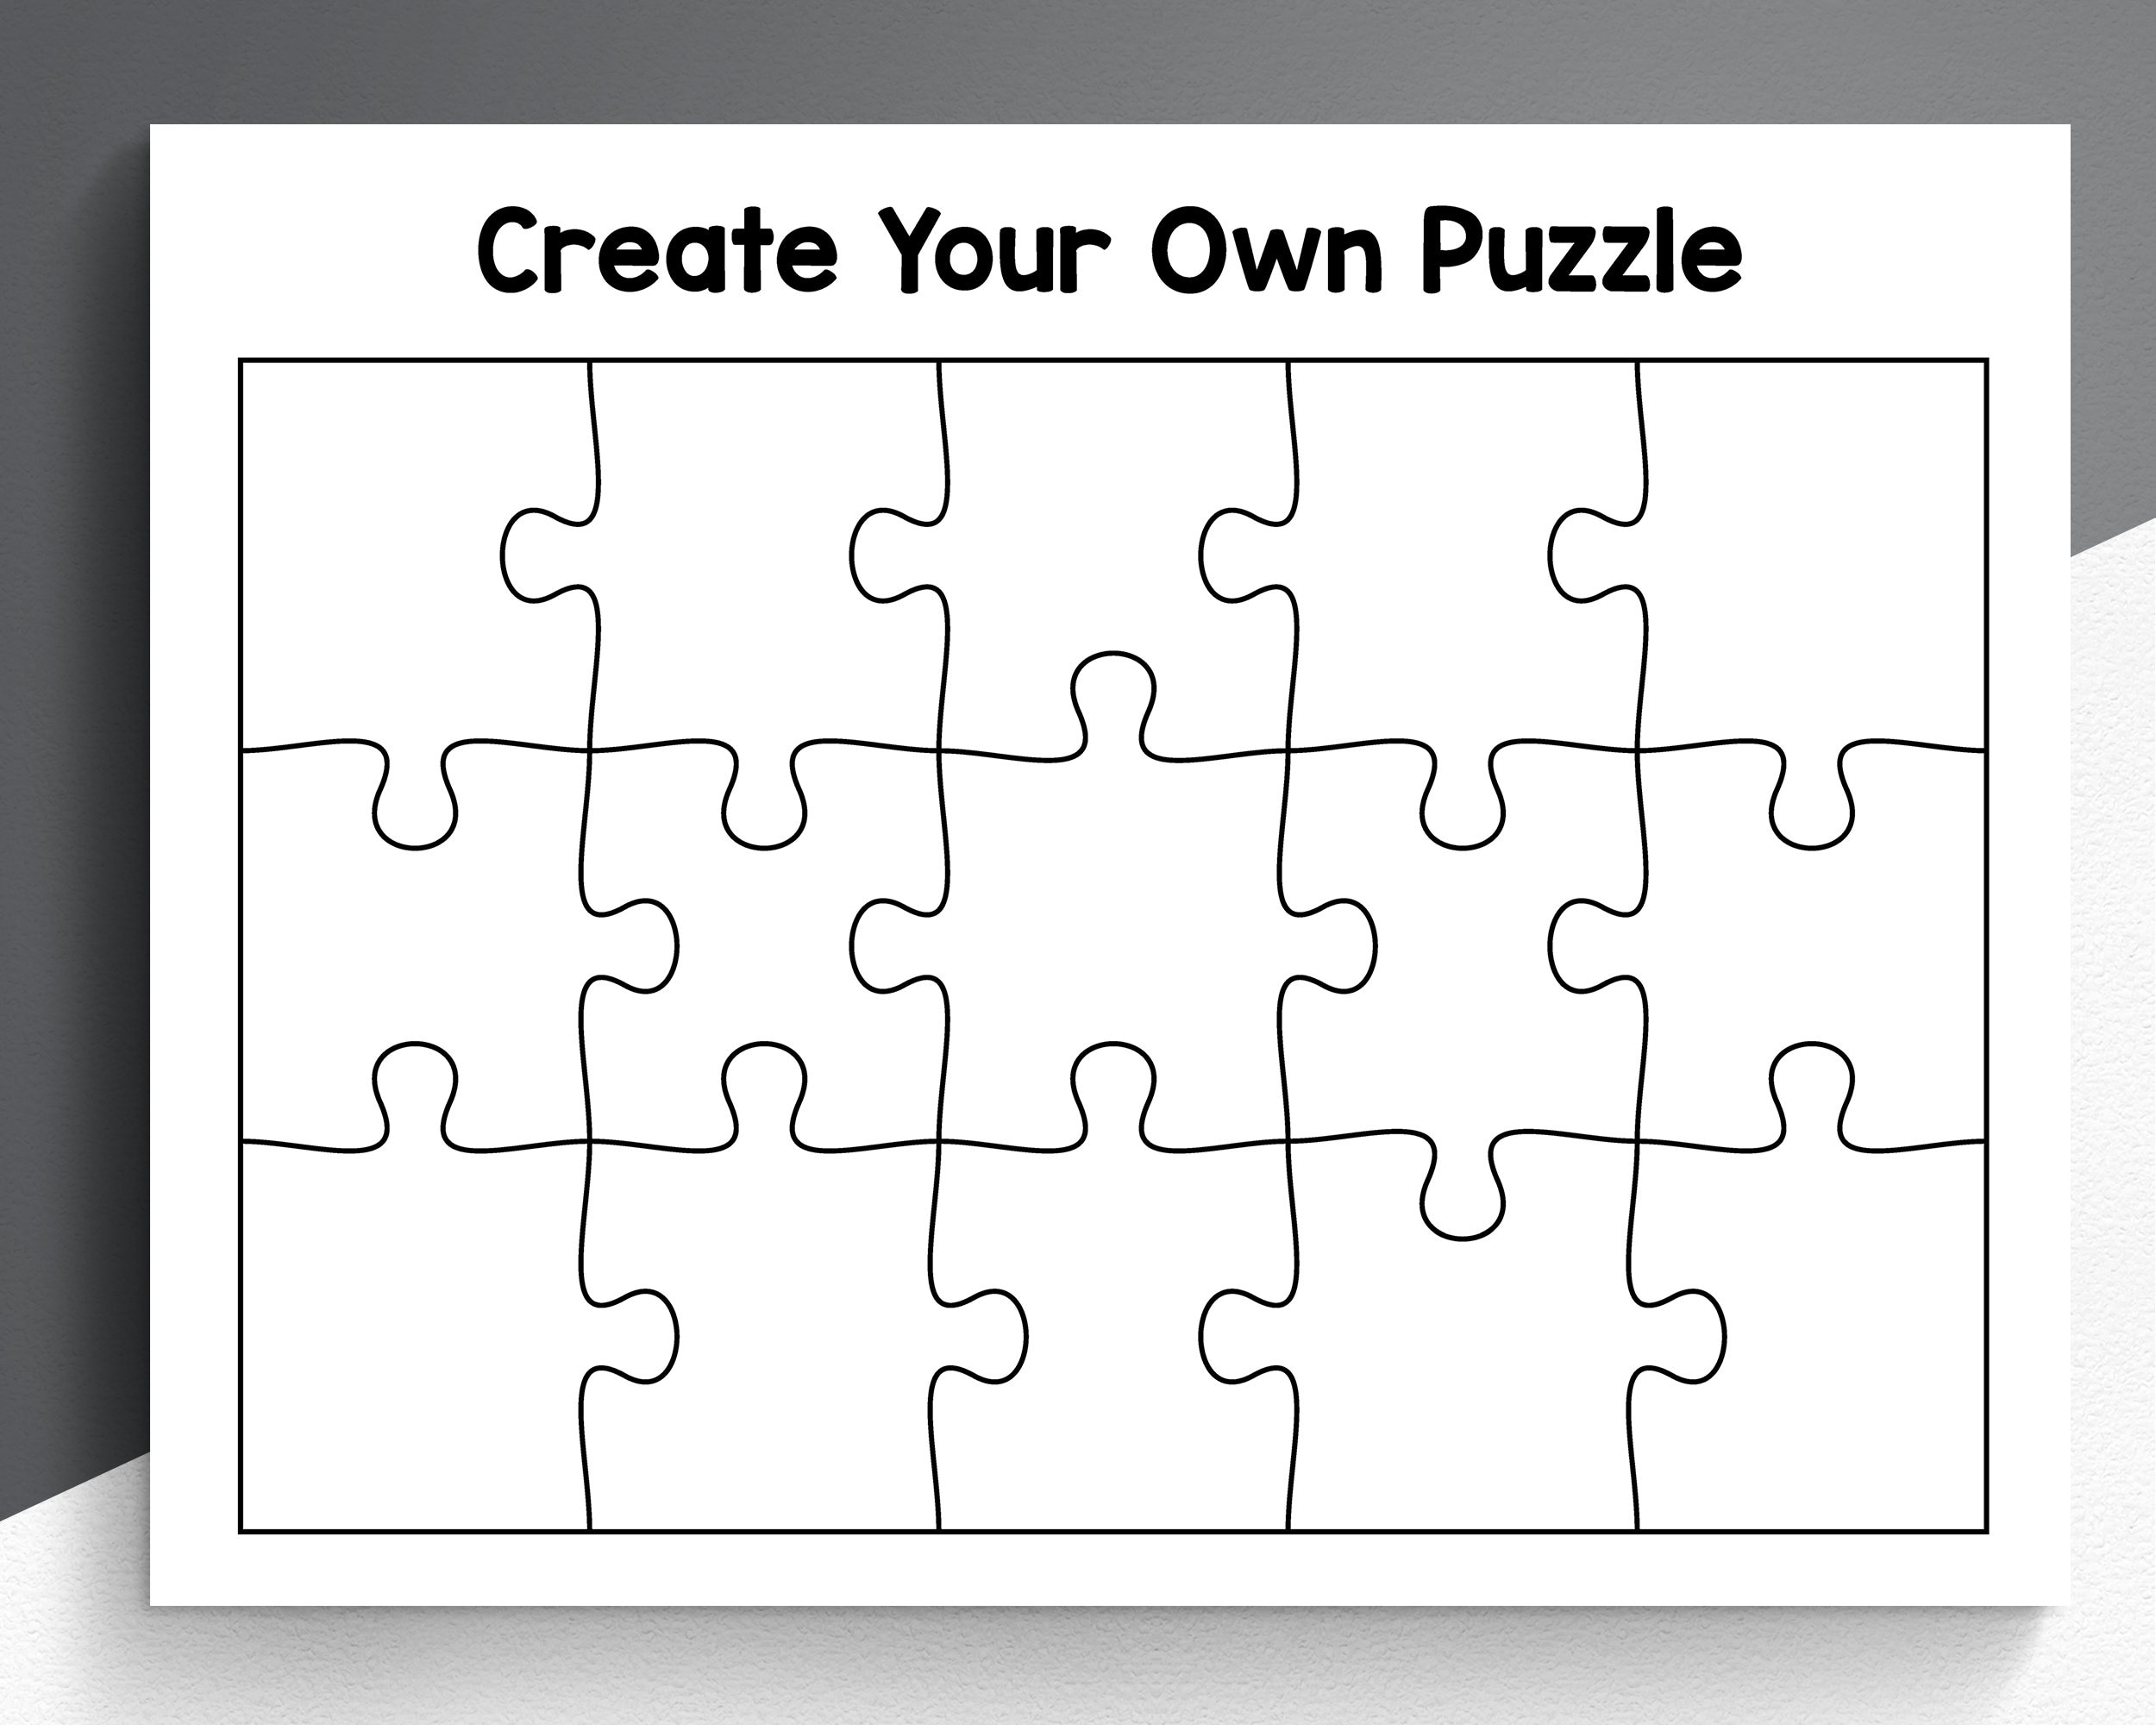 Blank Puzzle with 24 Pieces, Each Piece is Unique, Blank Wooden Jigsaw  Puzzles with Puzzle Tray for Crafts & DIY, Make Your Own Puzzle 11.7x8.8  Inches